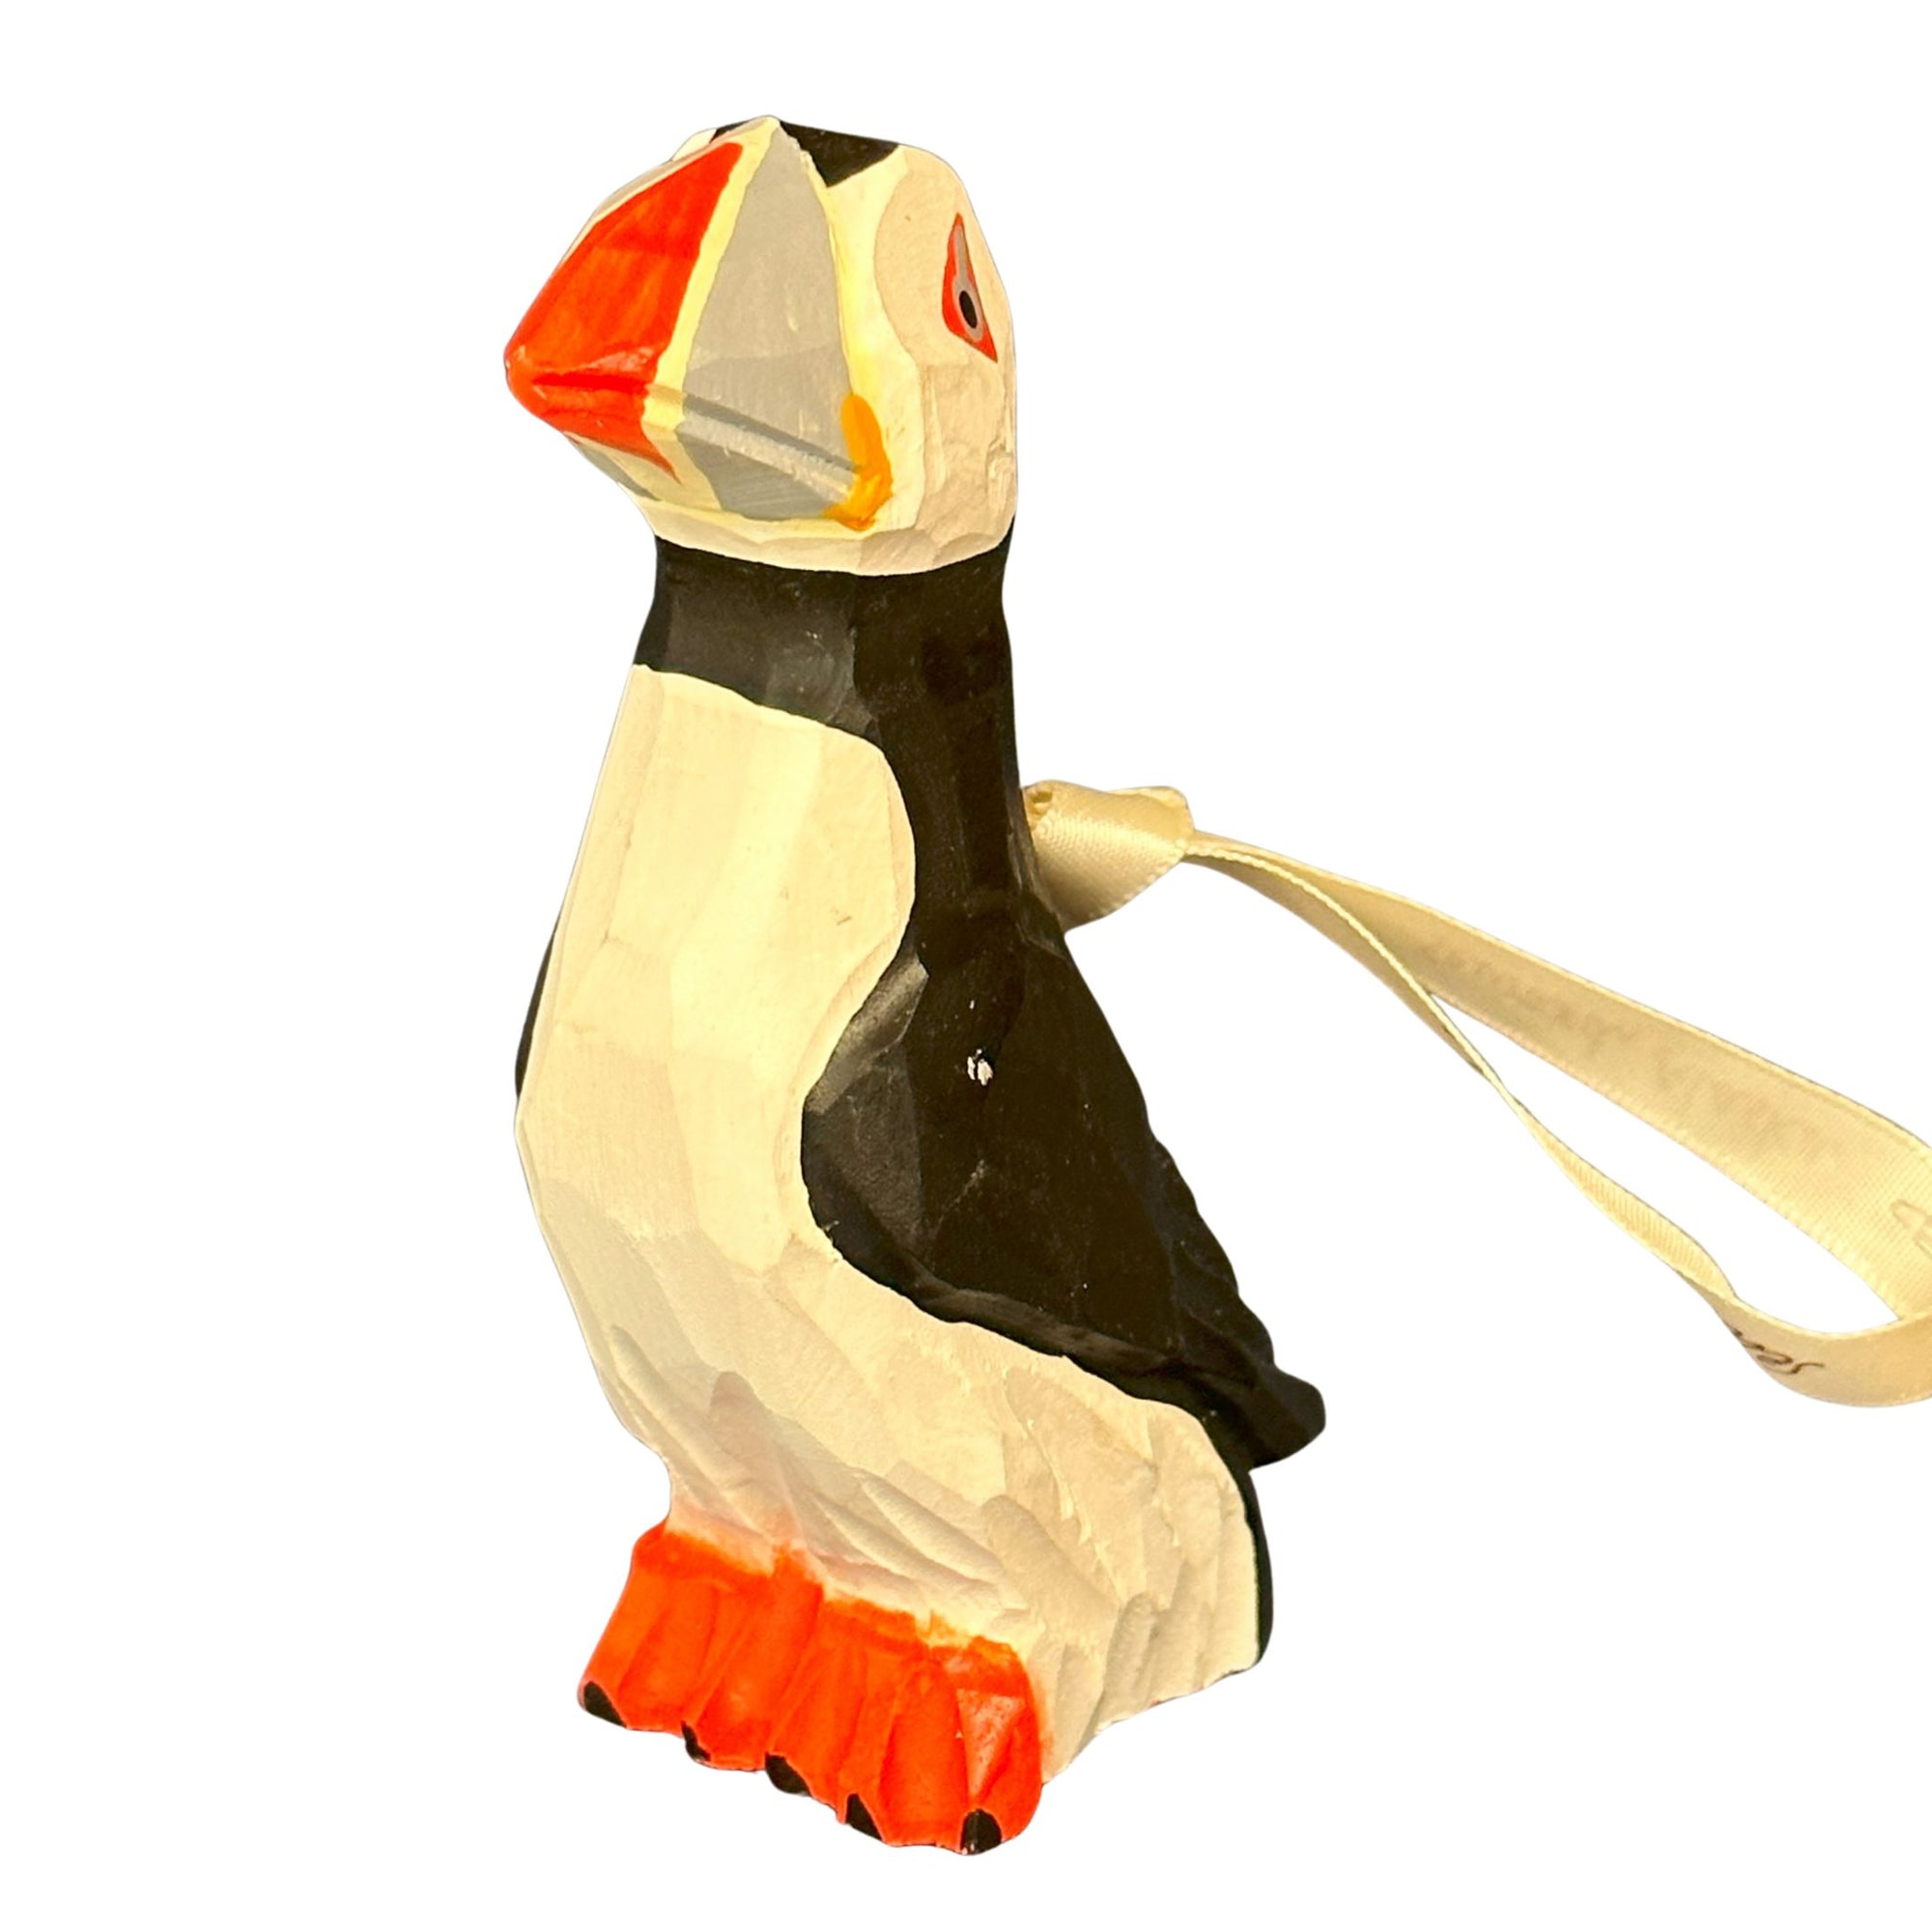 Puffin Hand Carved Wood Ornament